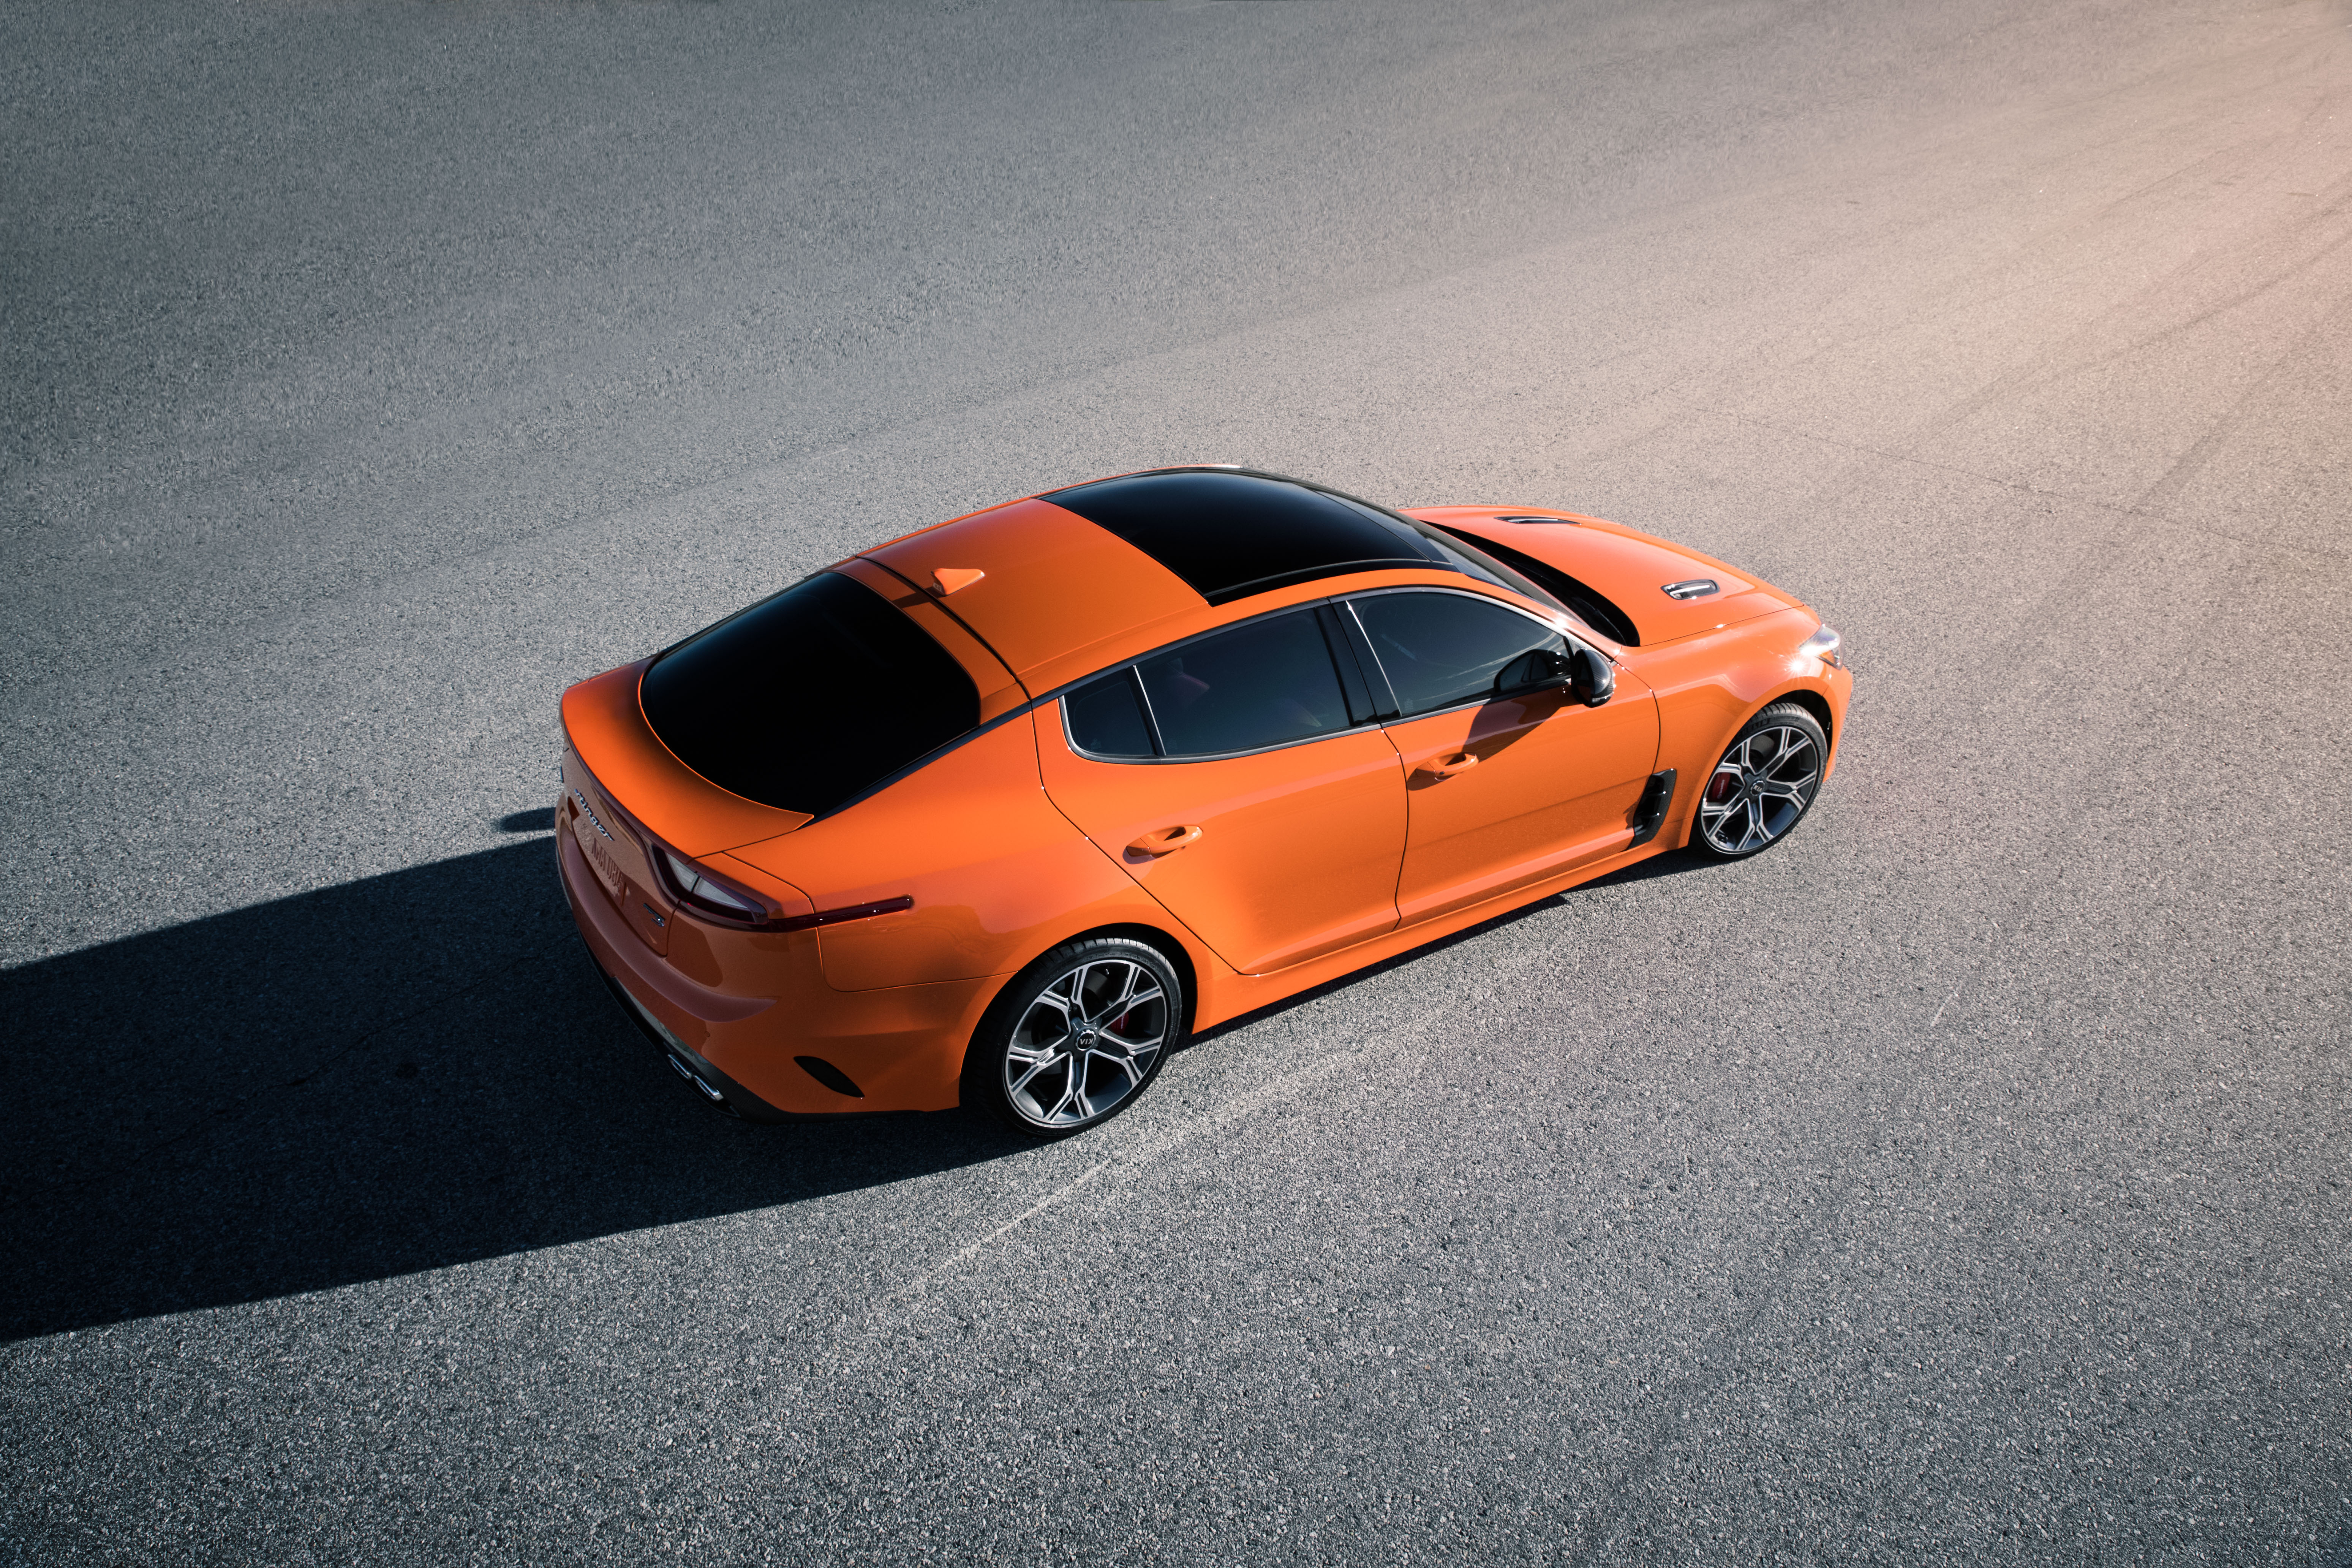 30 Kia Stinger HD Wallpapers and Backgrounds